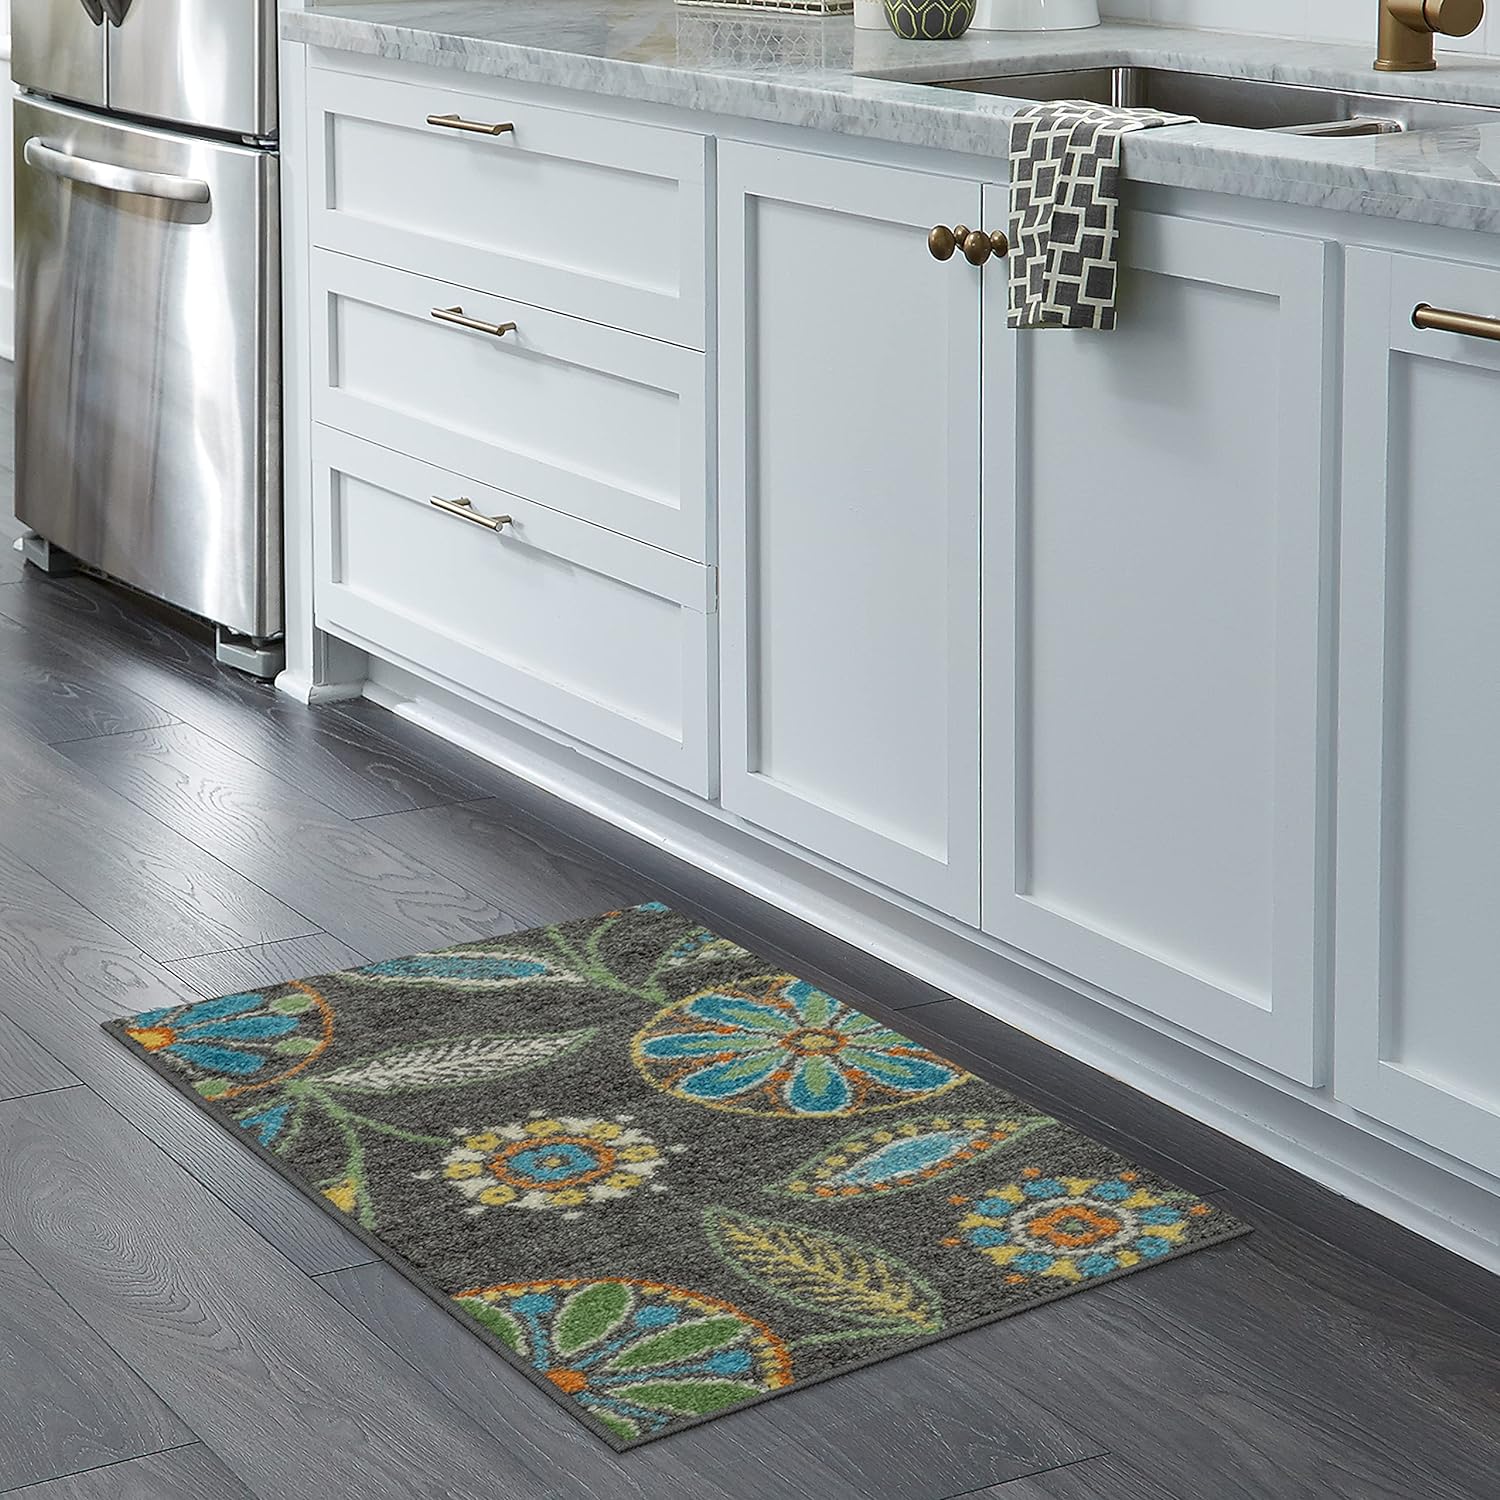 This rug is absolutely perfect. The size was just right for the area in my laundry room. It is a nice thickness and weight stays in place great. Love the color and it doesn't show dirty from peoples shoes coming in from outside.